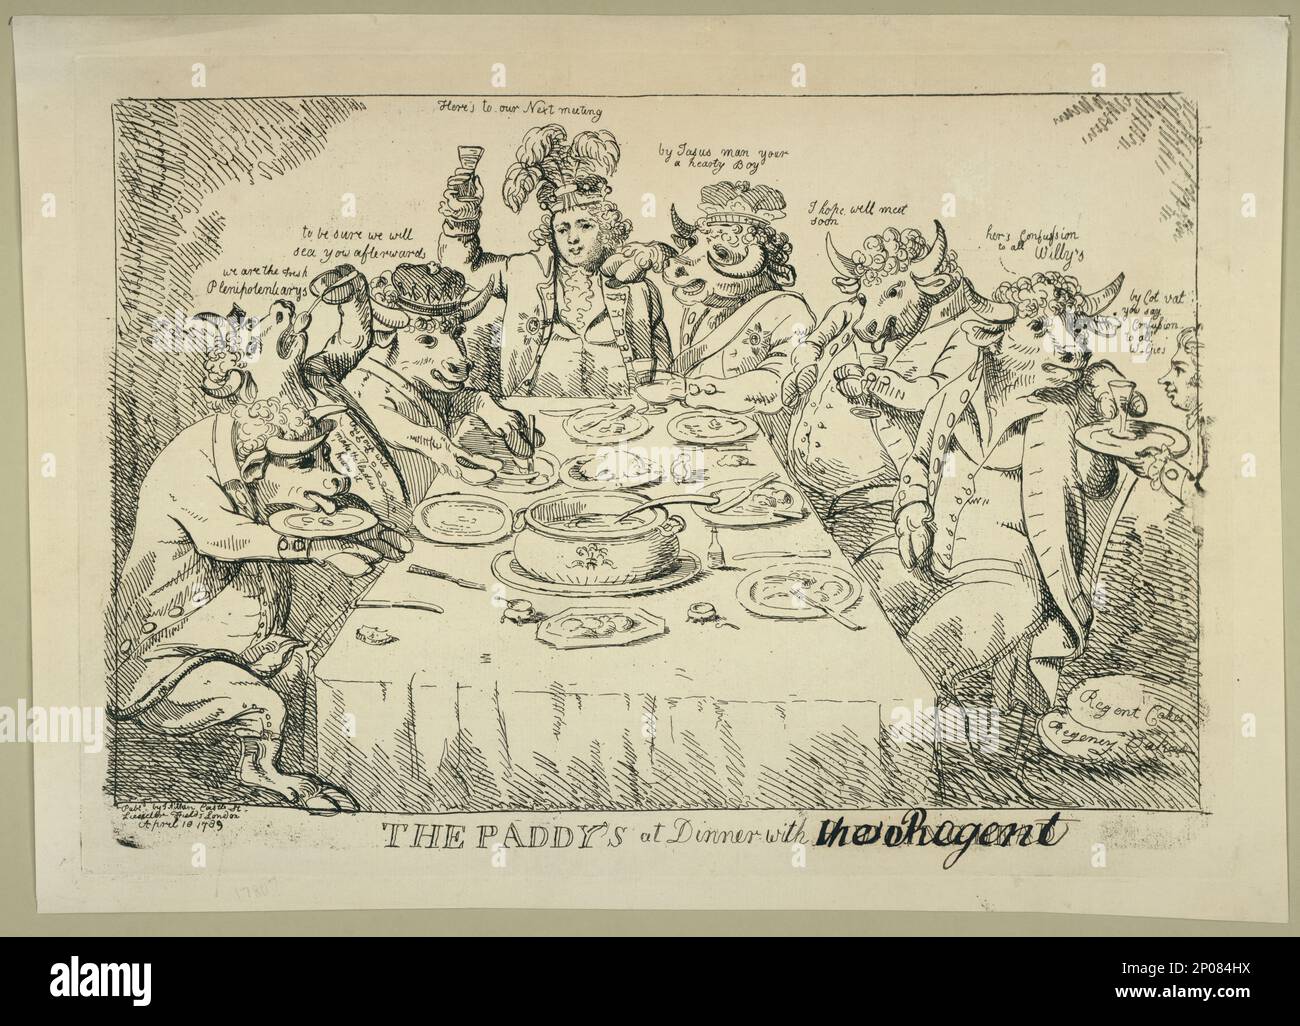 The paddy's at dinner with Puddinghead the Regent. British Cartoon Prints 580196Collection . George,IV,King of Great Britain,1762-1830. , Eating & drinking,England,1780-1790. , Bulls,1780-1790. , Politics & government,England,1780-1790. Stock Photo